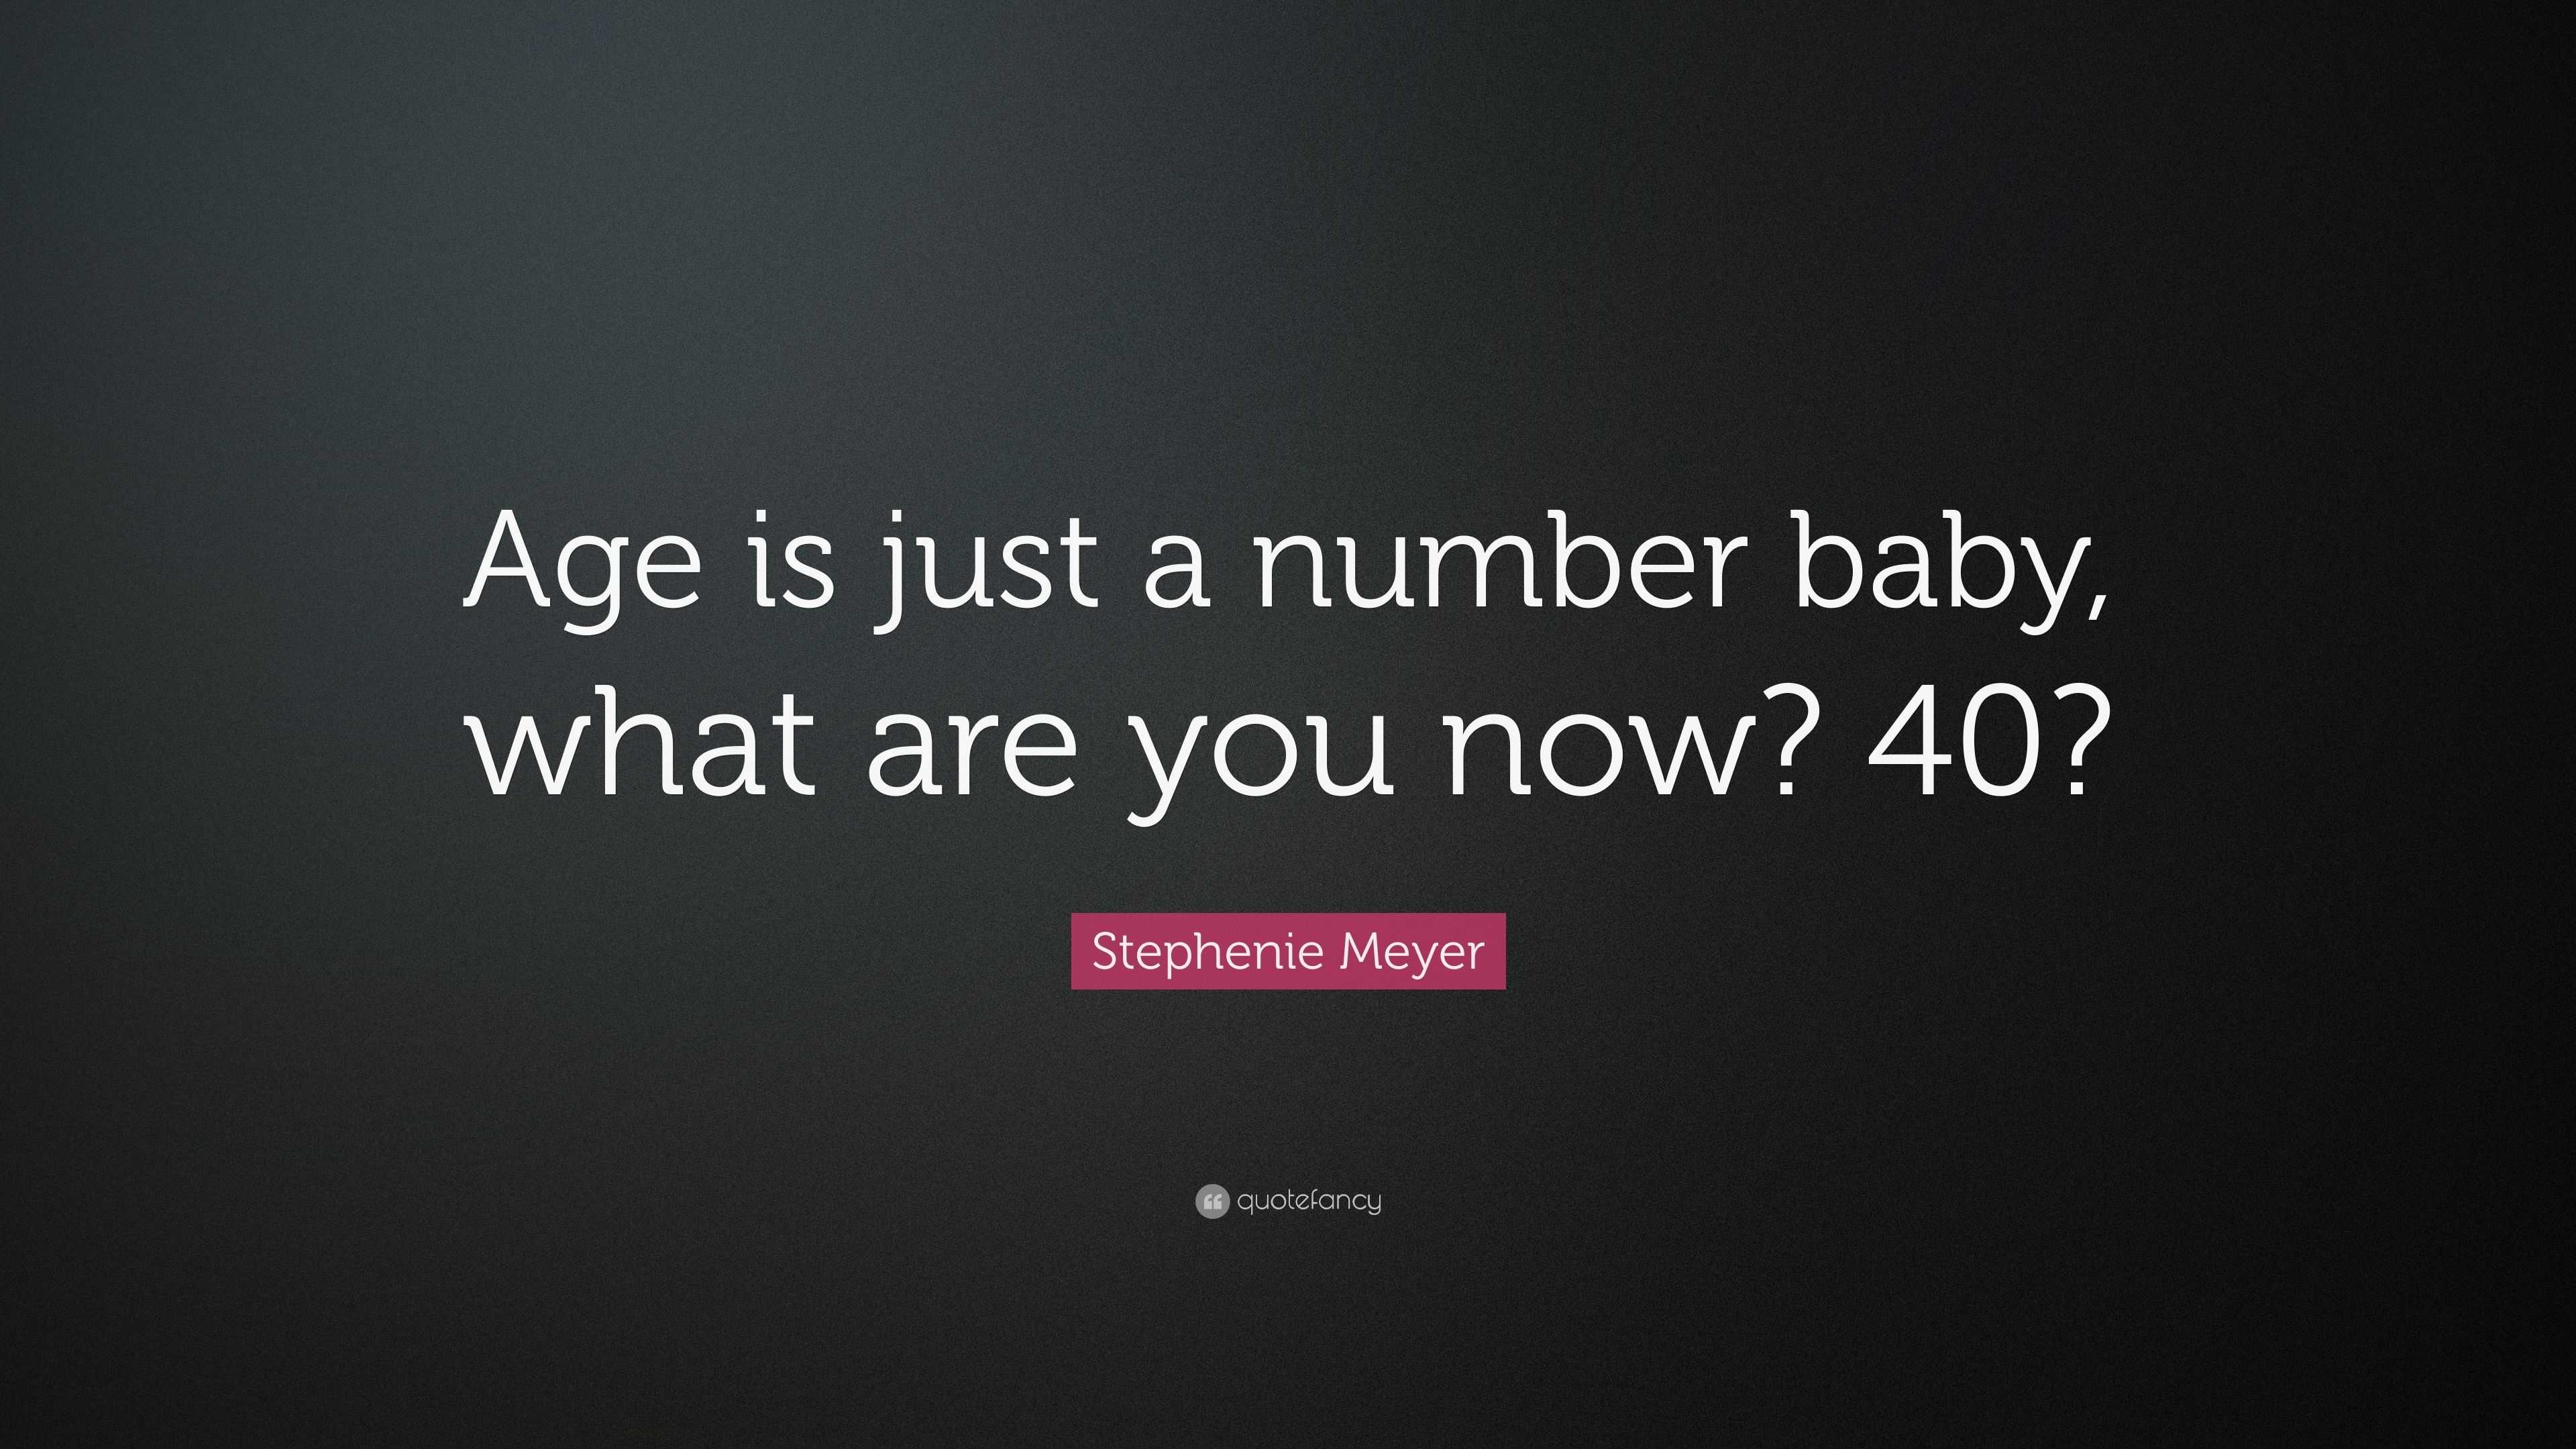 Stephenie Meyer Quote “Age is just a number baby, what